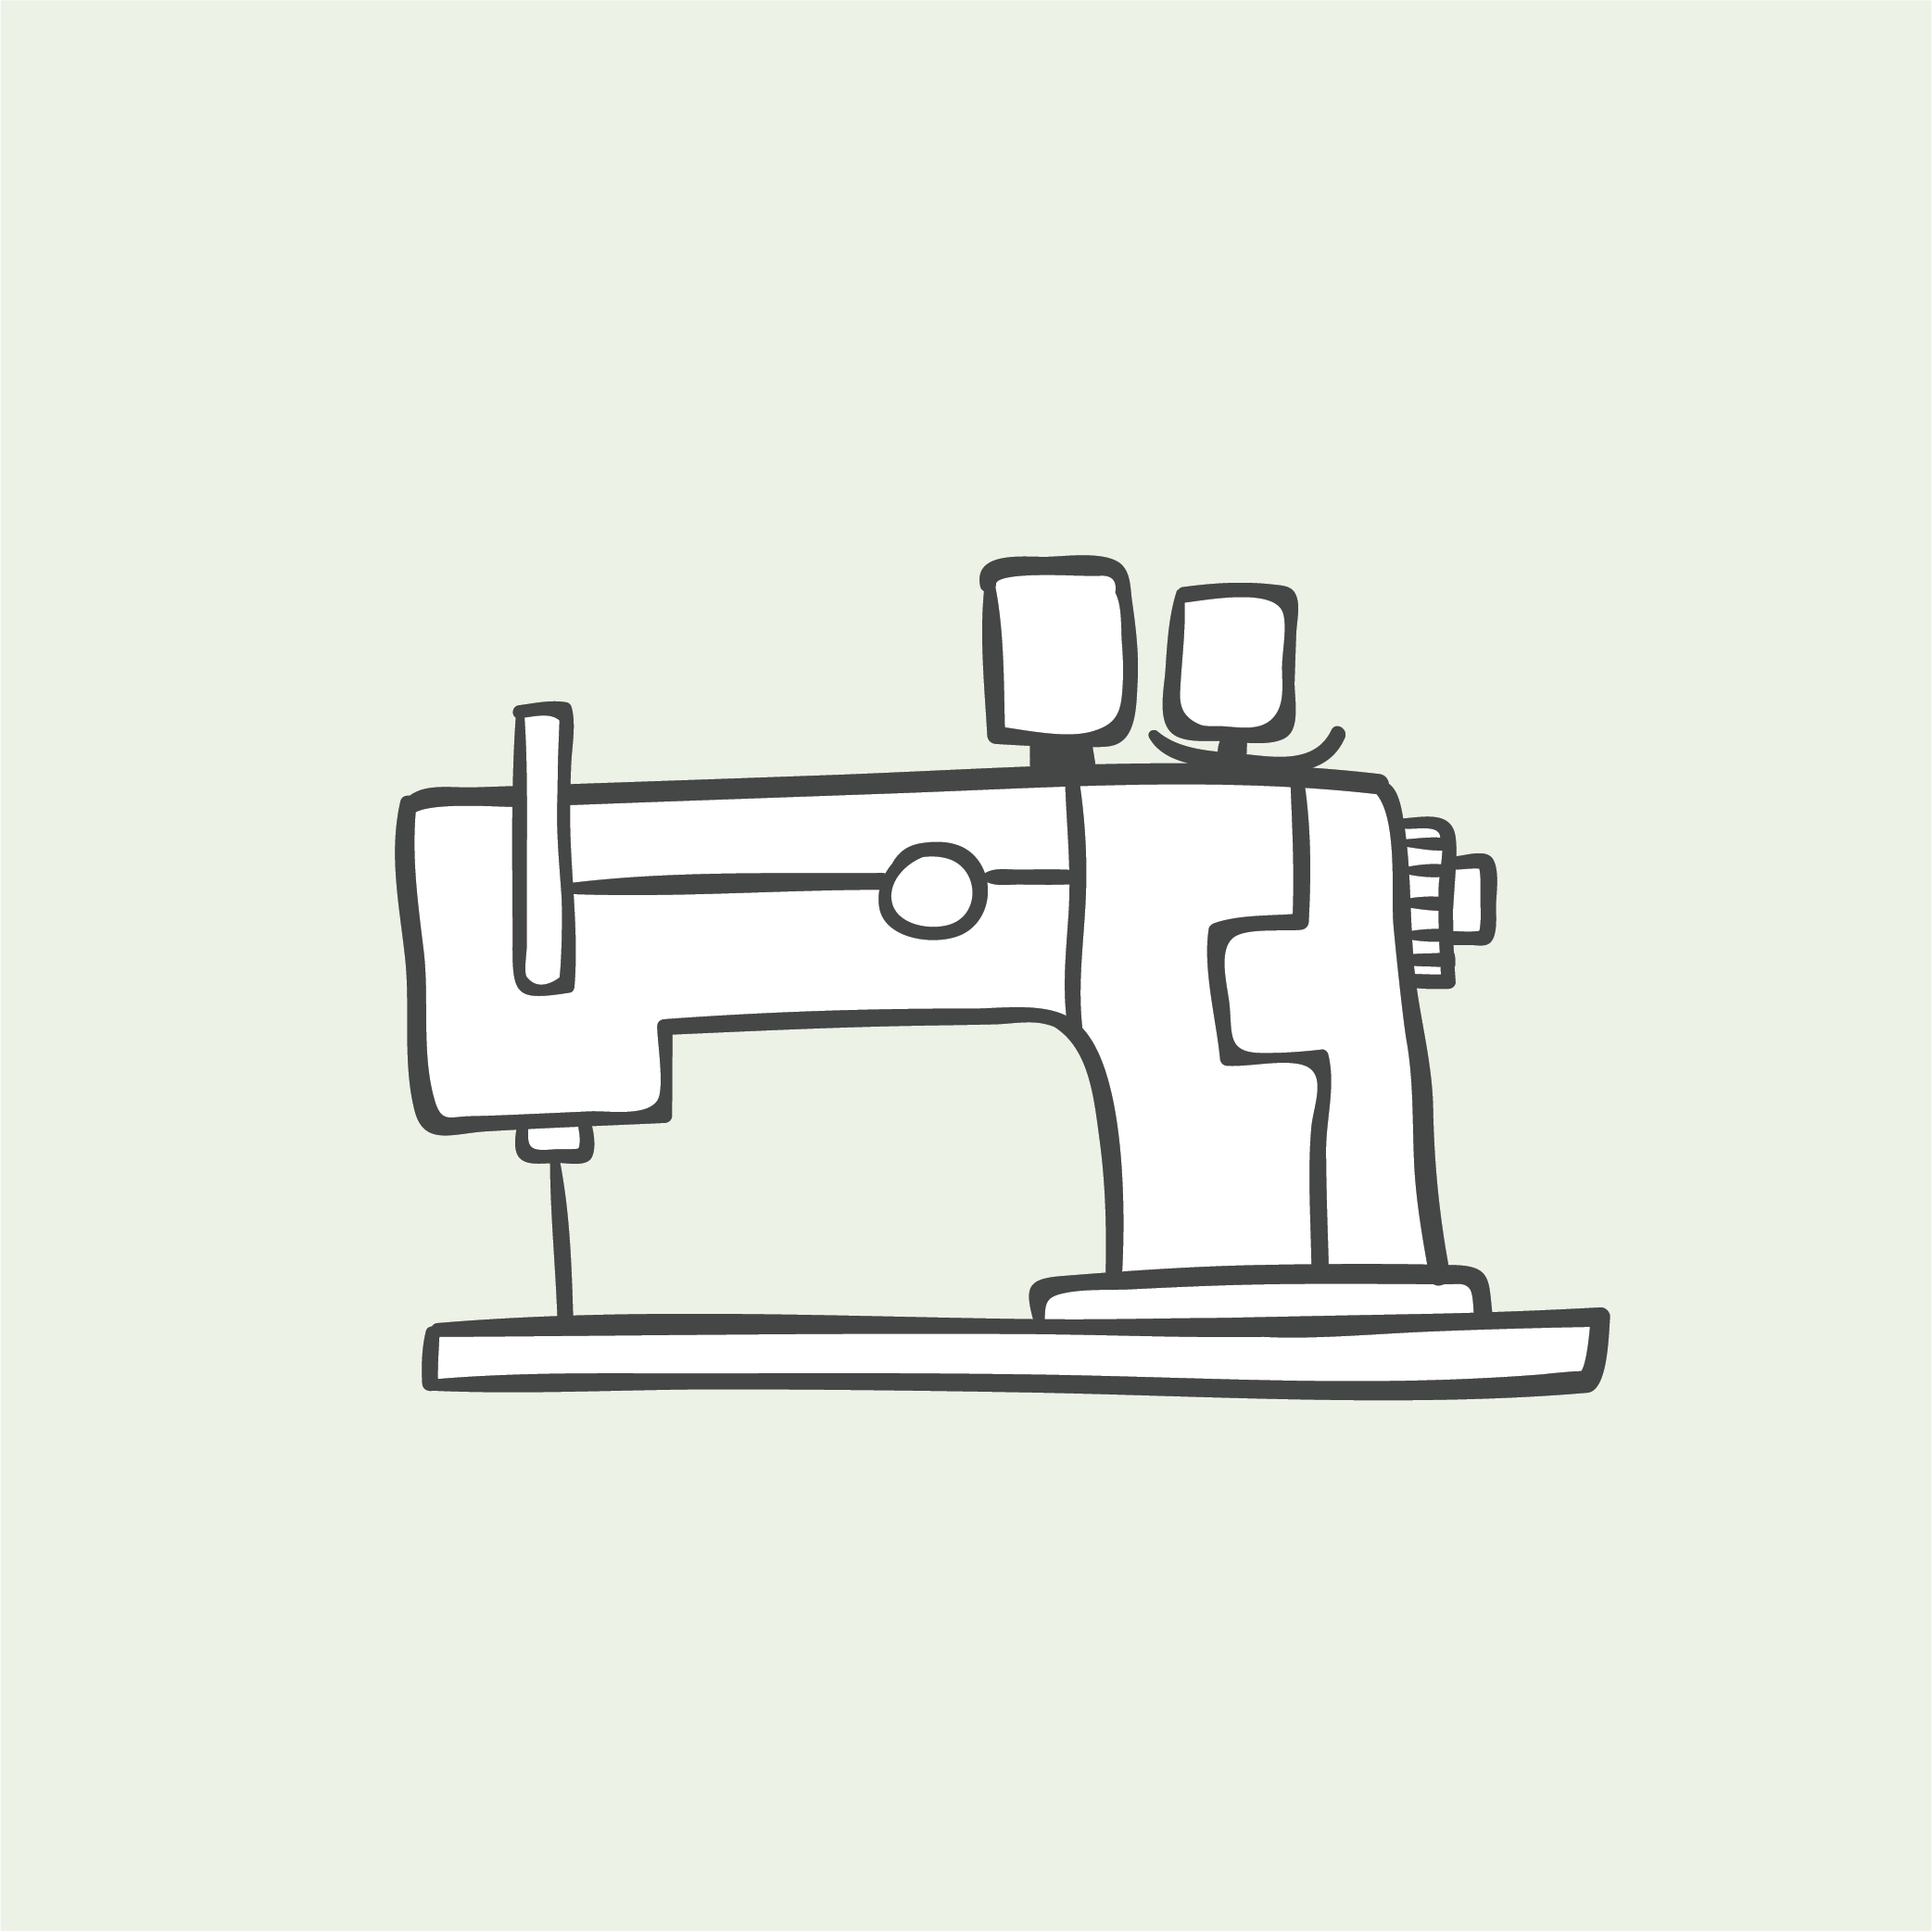 Illustration of a sewing machine